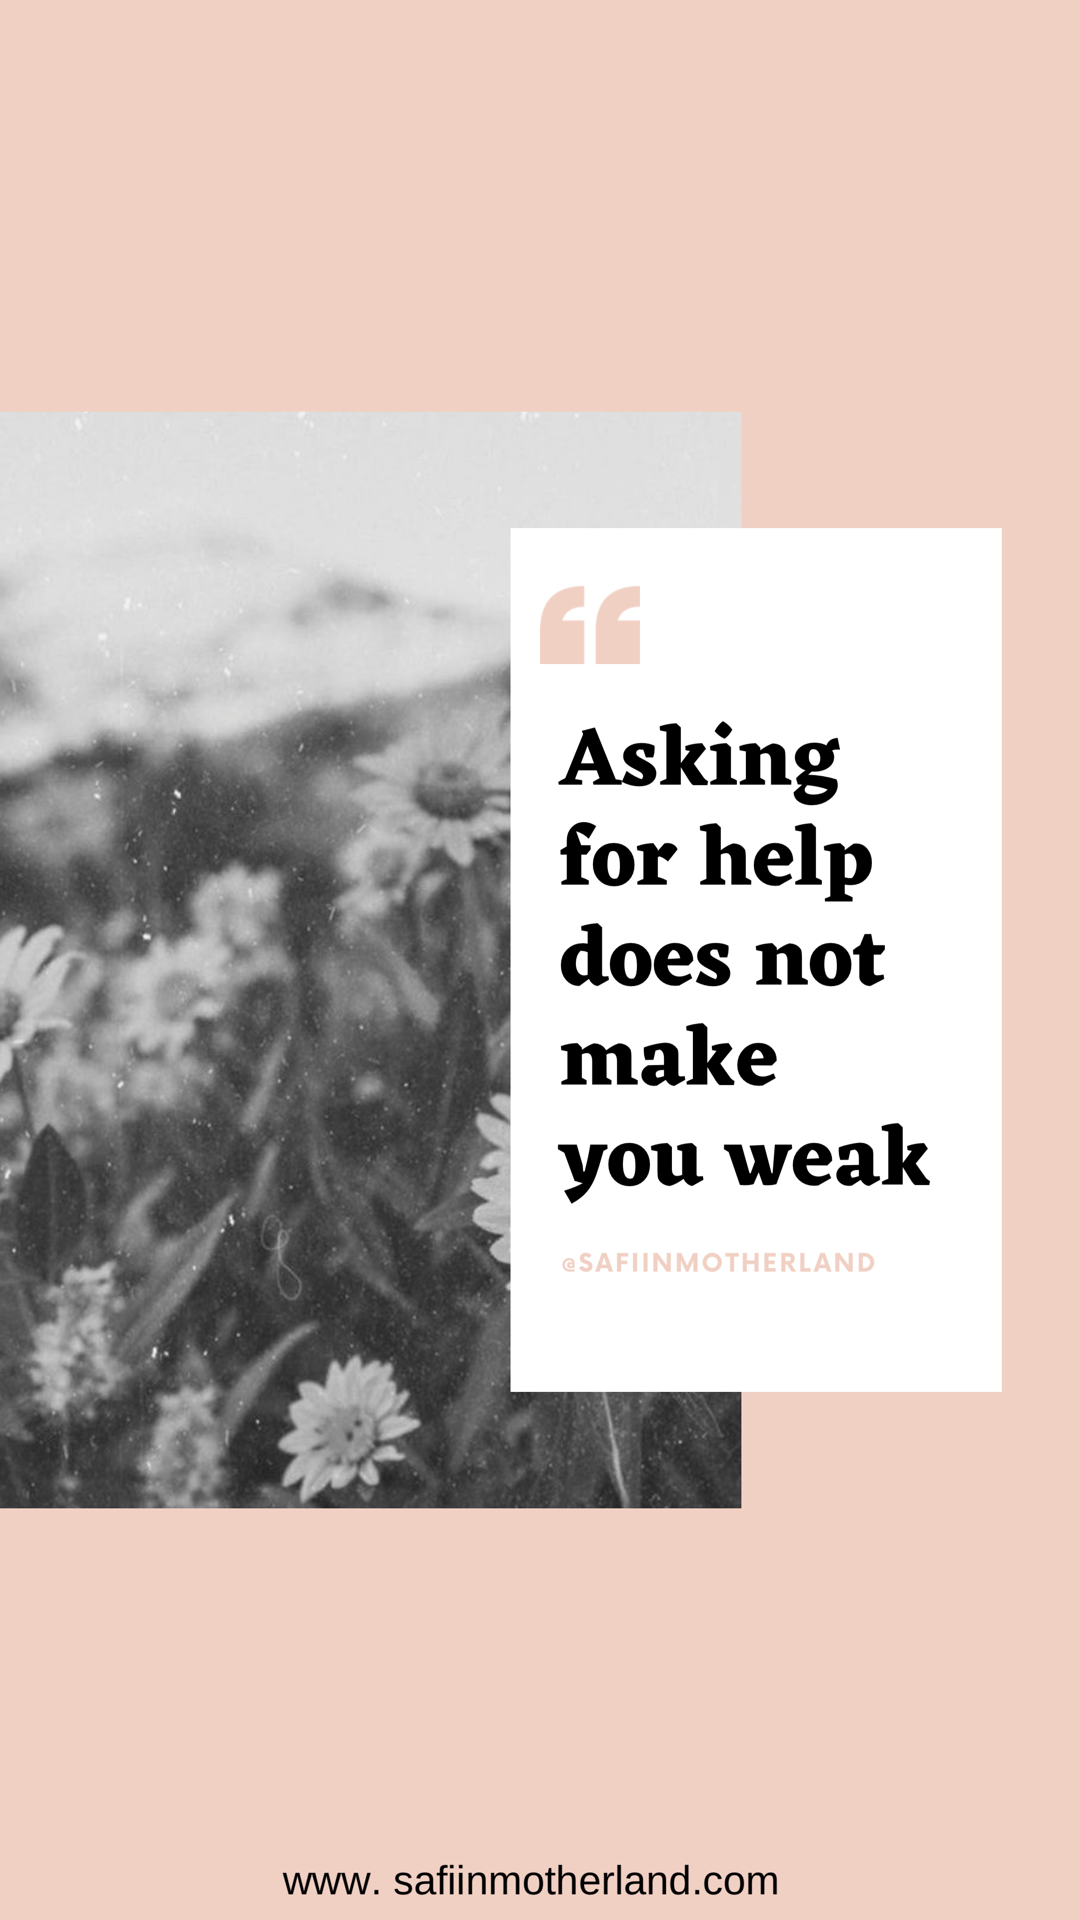 Asking for help does not make you weak